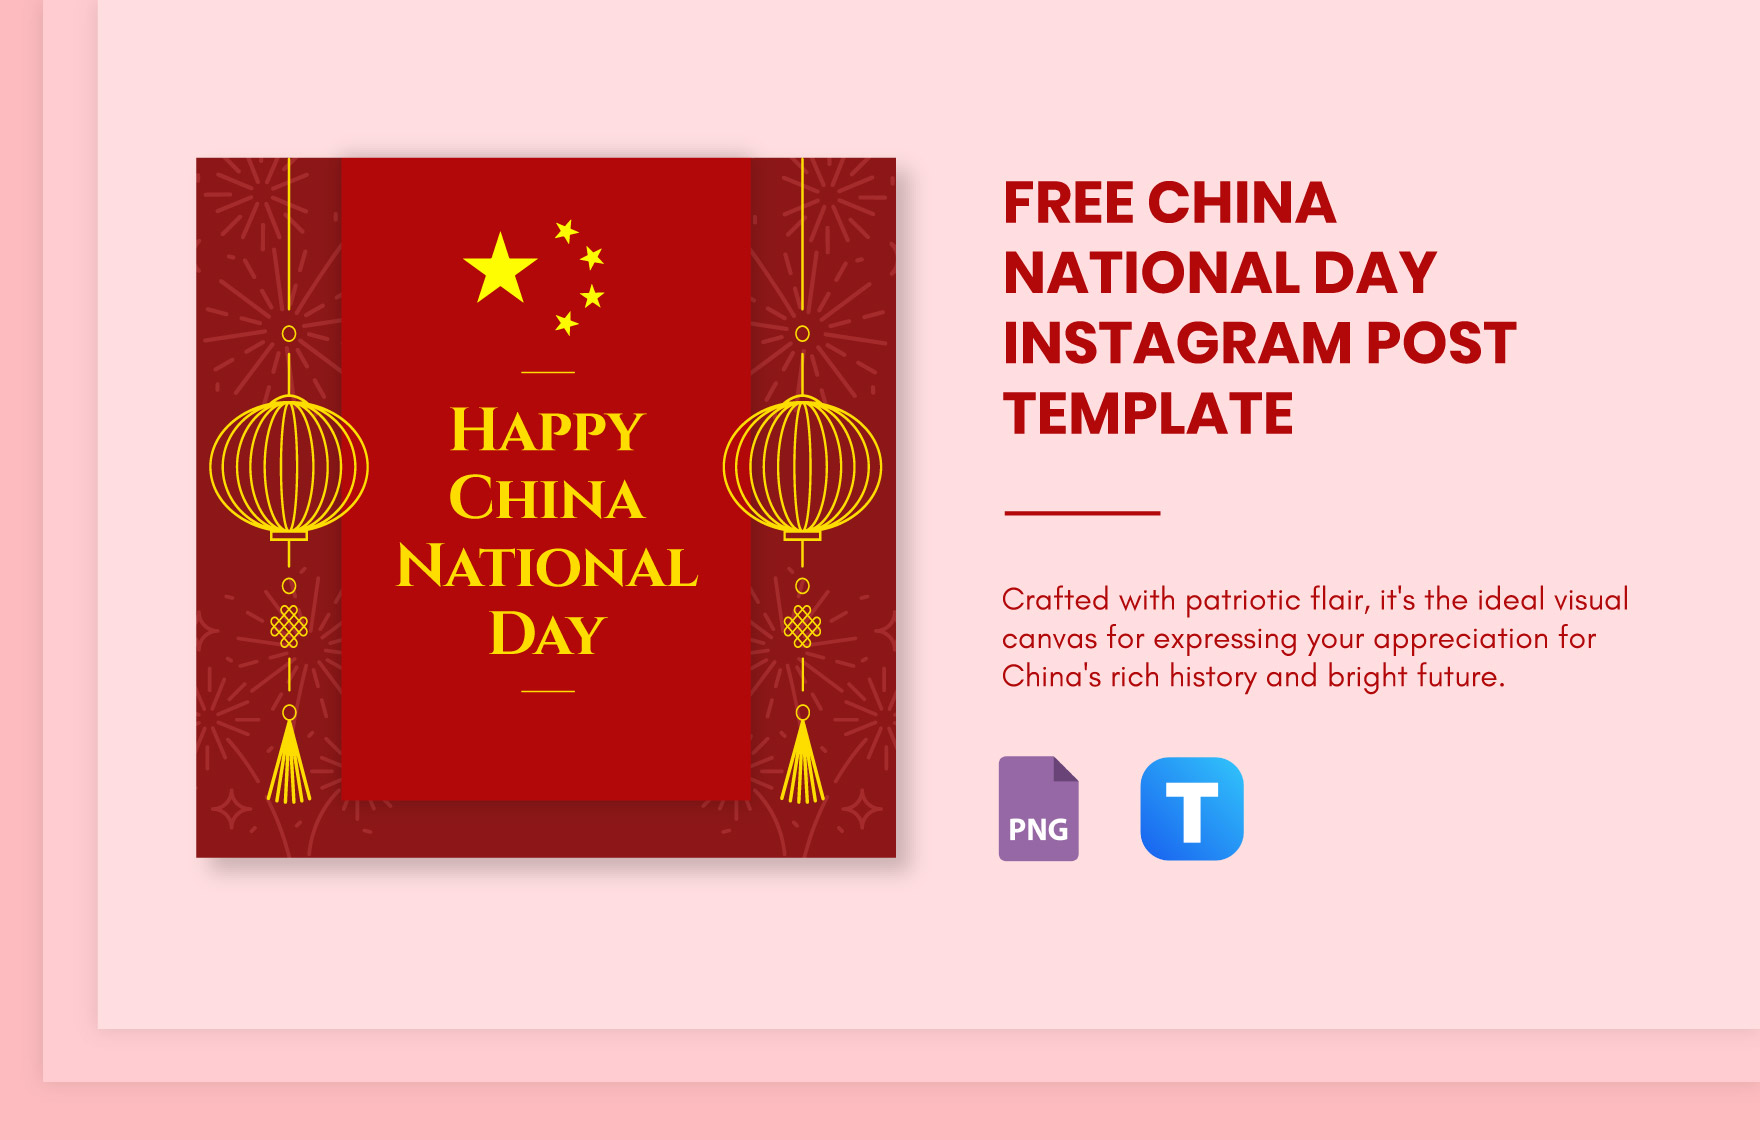 Free China National Day Instagram Post Template in PNG